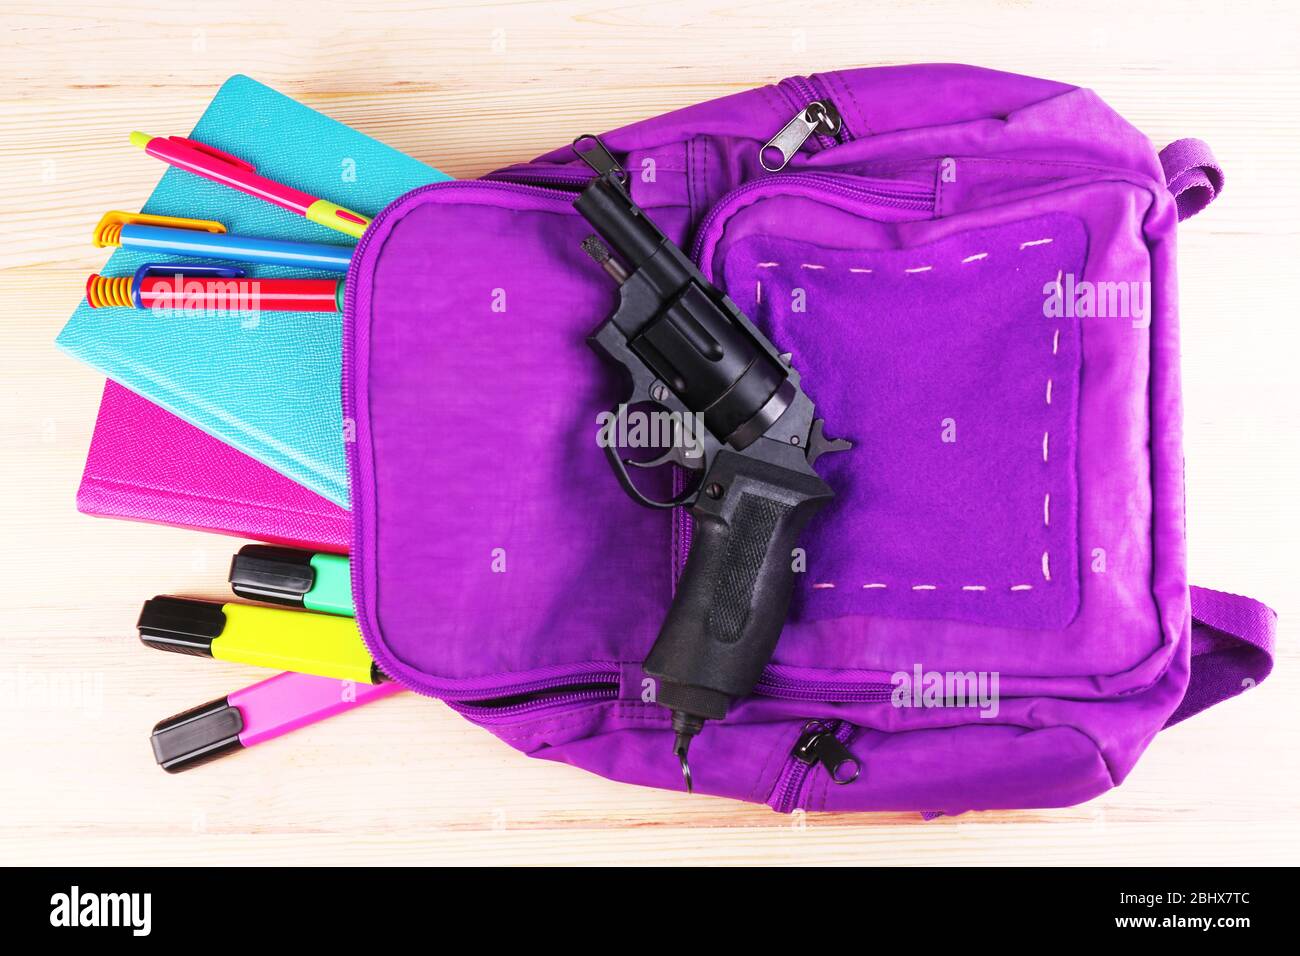 Gun in school backpack on wooden background Stock Photo - Alamy